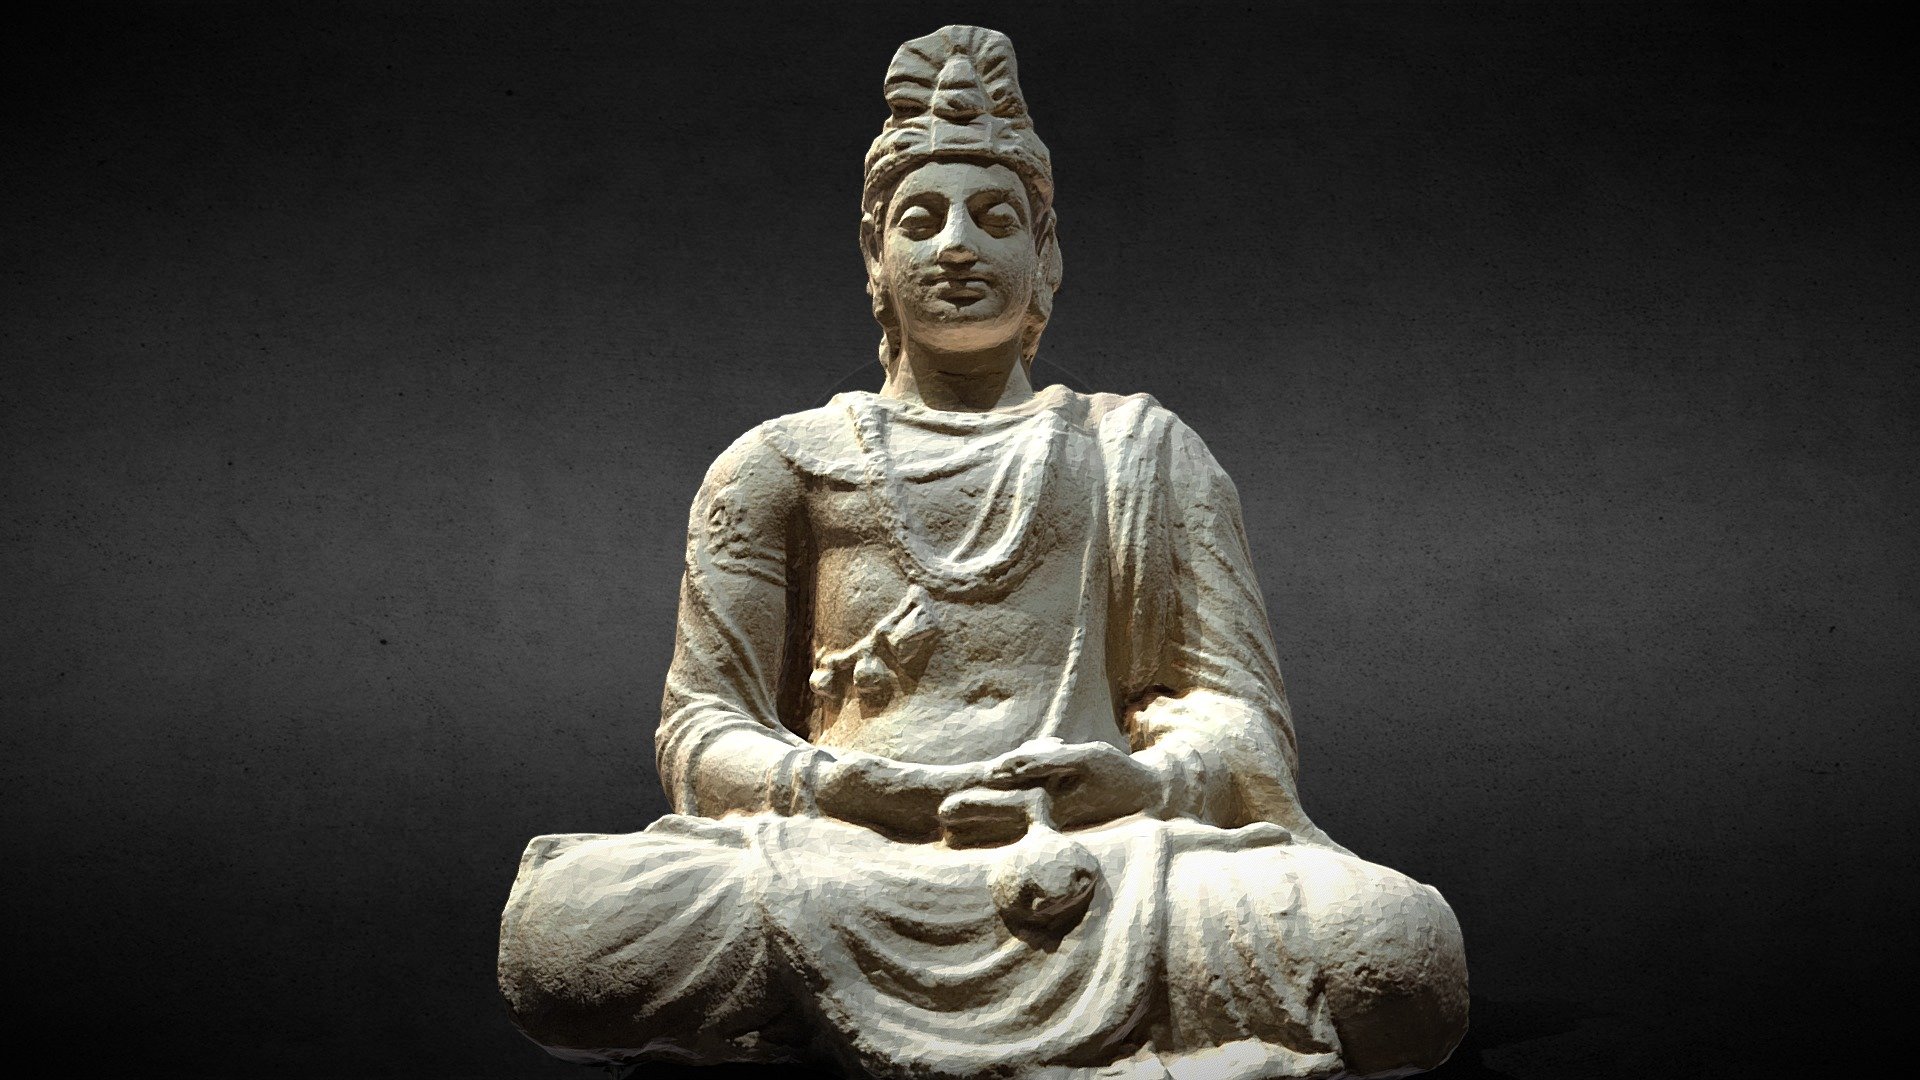 3rd to 4th century AD, Pakistan area，stucco material。
This seated Avalokitesvara Bodhisattva wears a tall Tiben-style crown, earrings hanging from the earlobes, eyes slightly closed, meditating, and a calm and relaxed facial expression, showing the unique charm of the stucco material.（净慈美术馆） - Seated Avalokitesvara - 3D model by Tigershill (@tigerofchen) 3d model